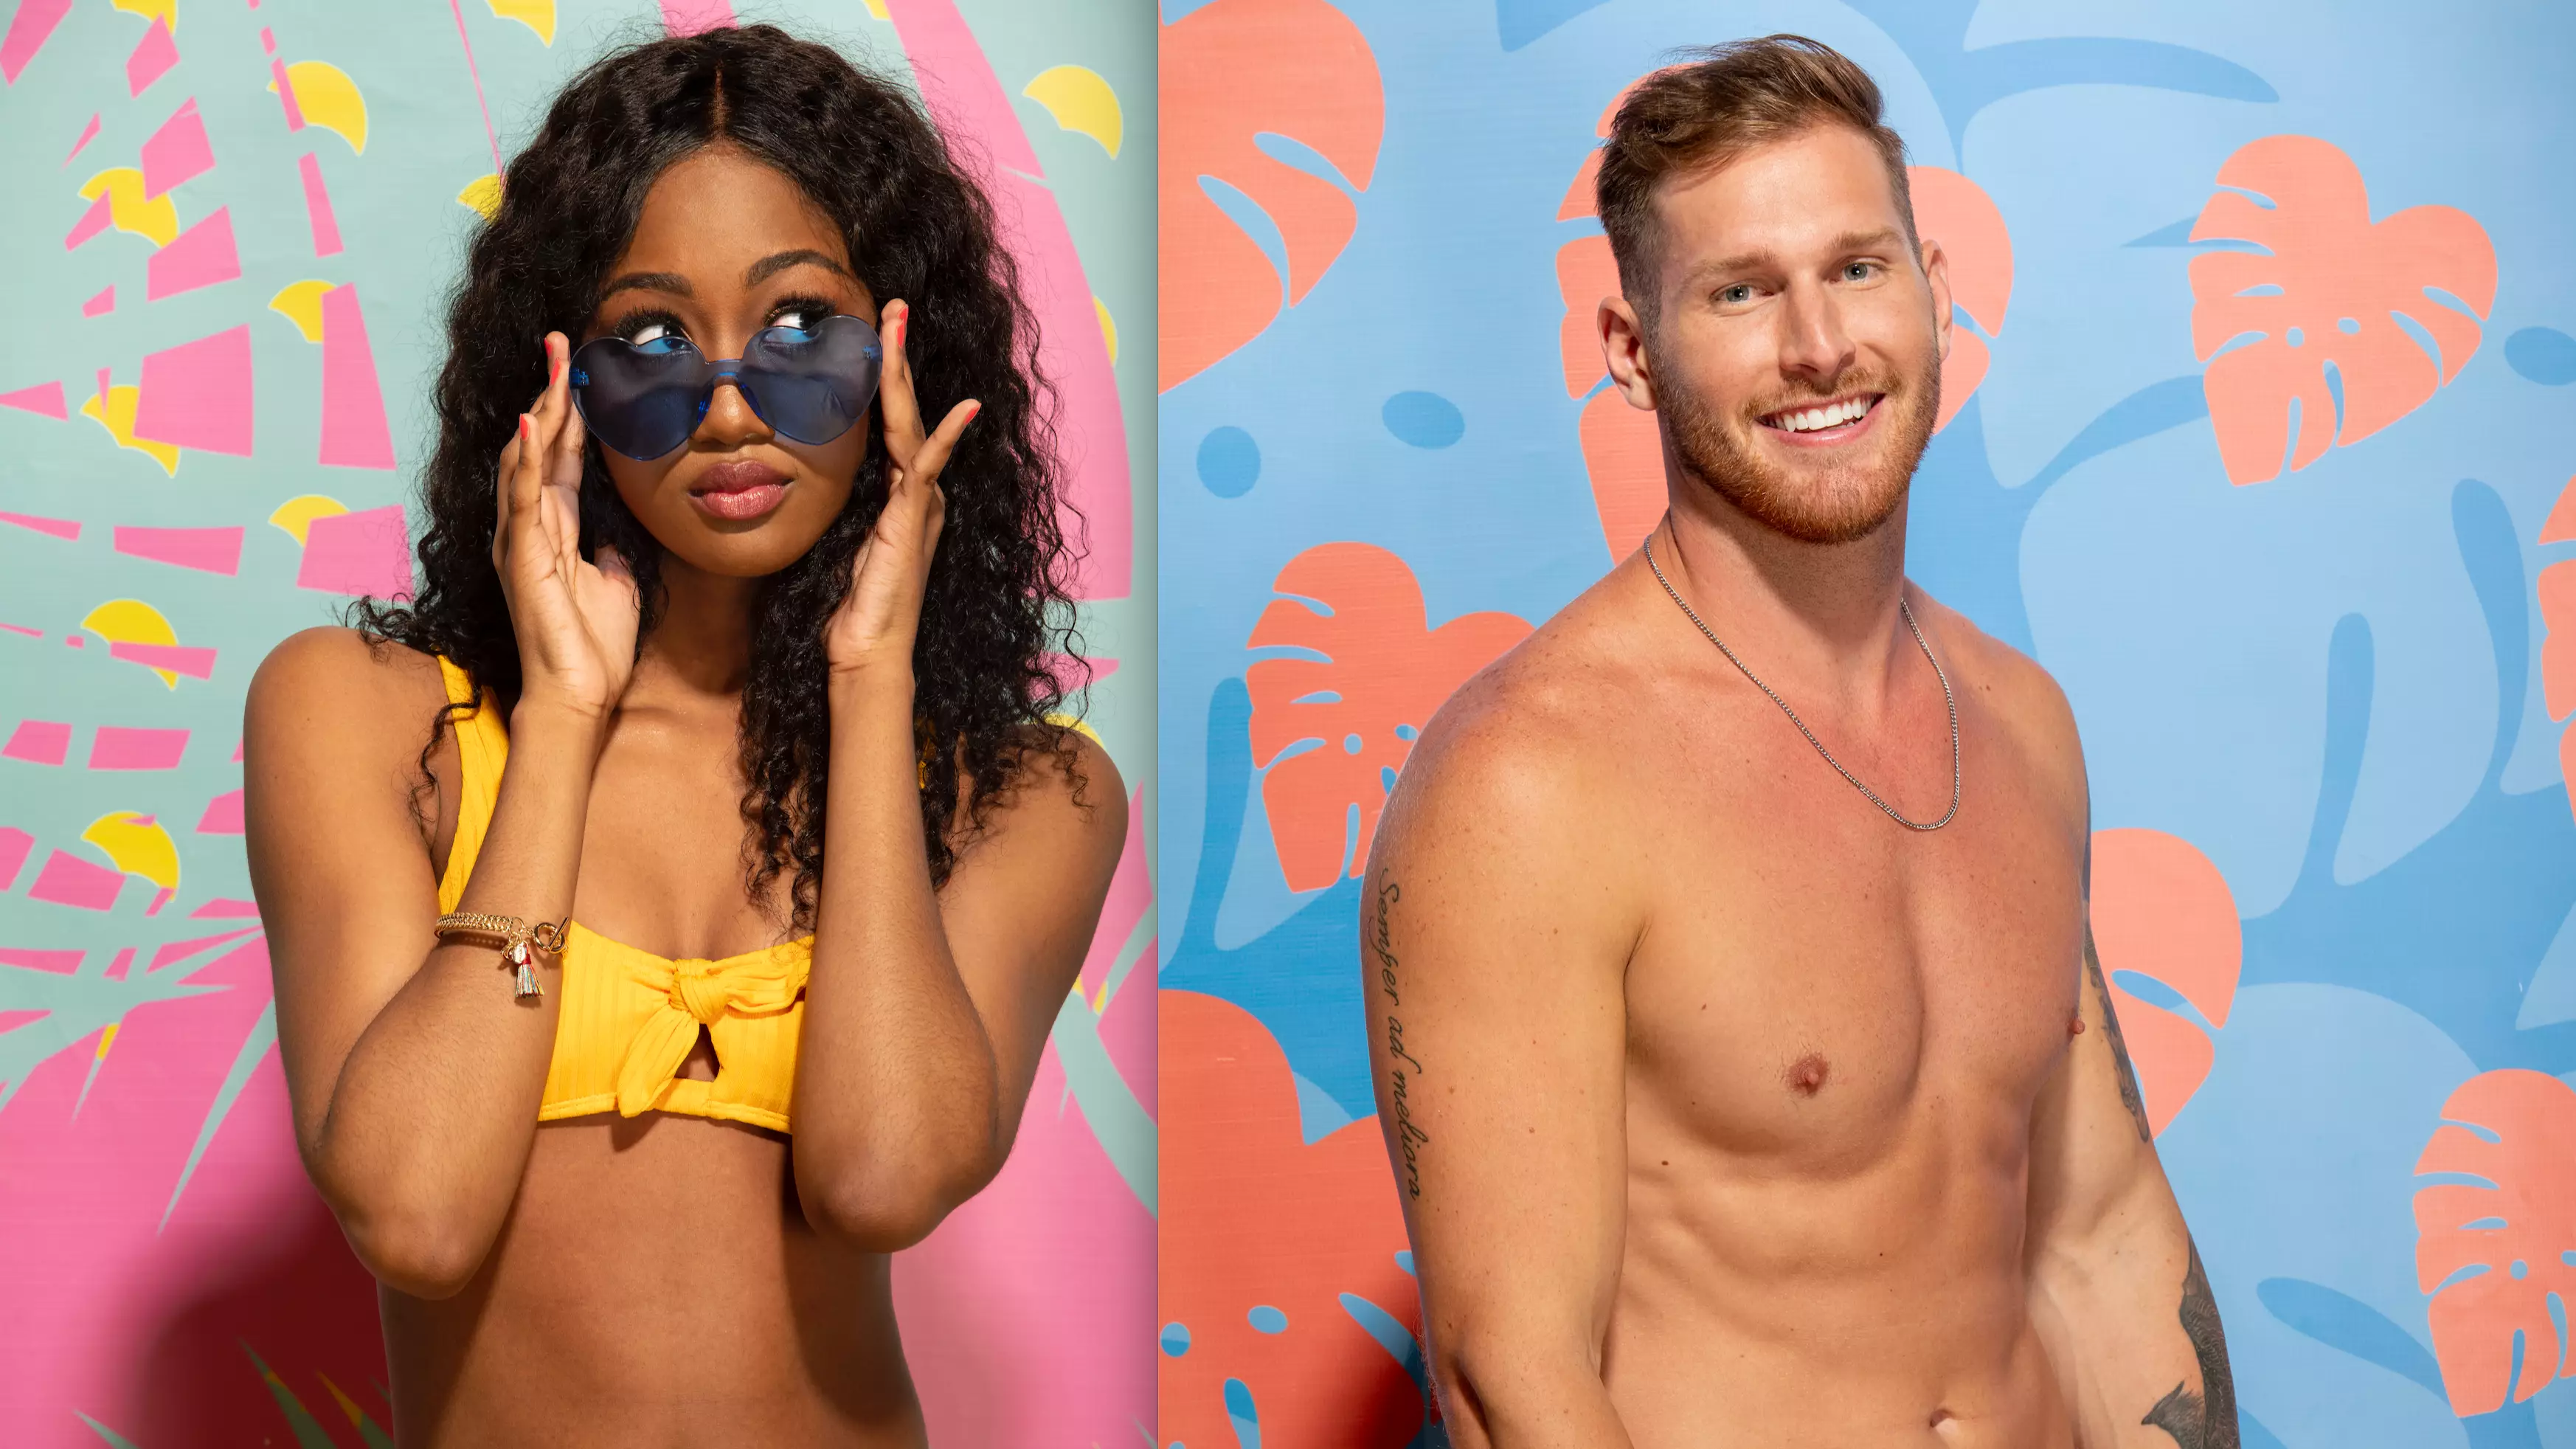 A ‘Love Island USA’ Is Coming Soon - Here's Everything You Need To Know